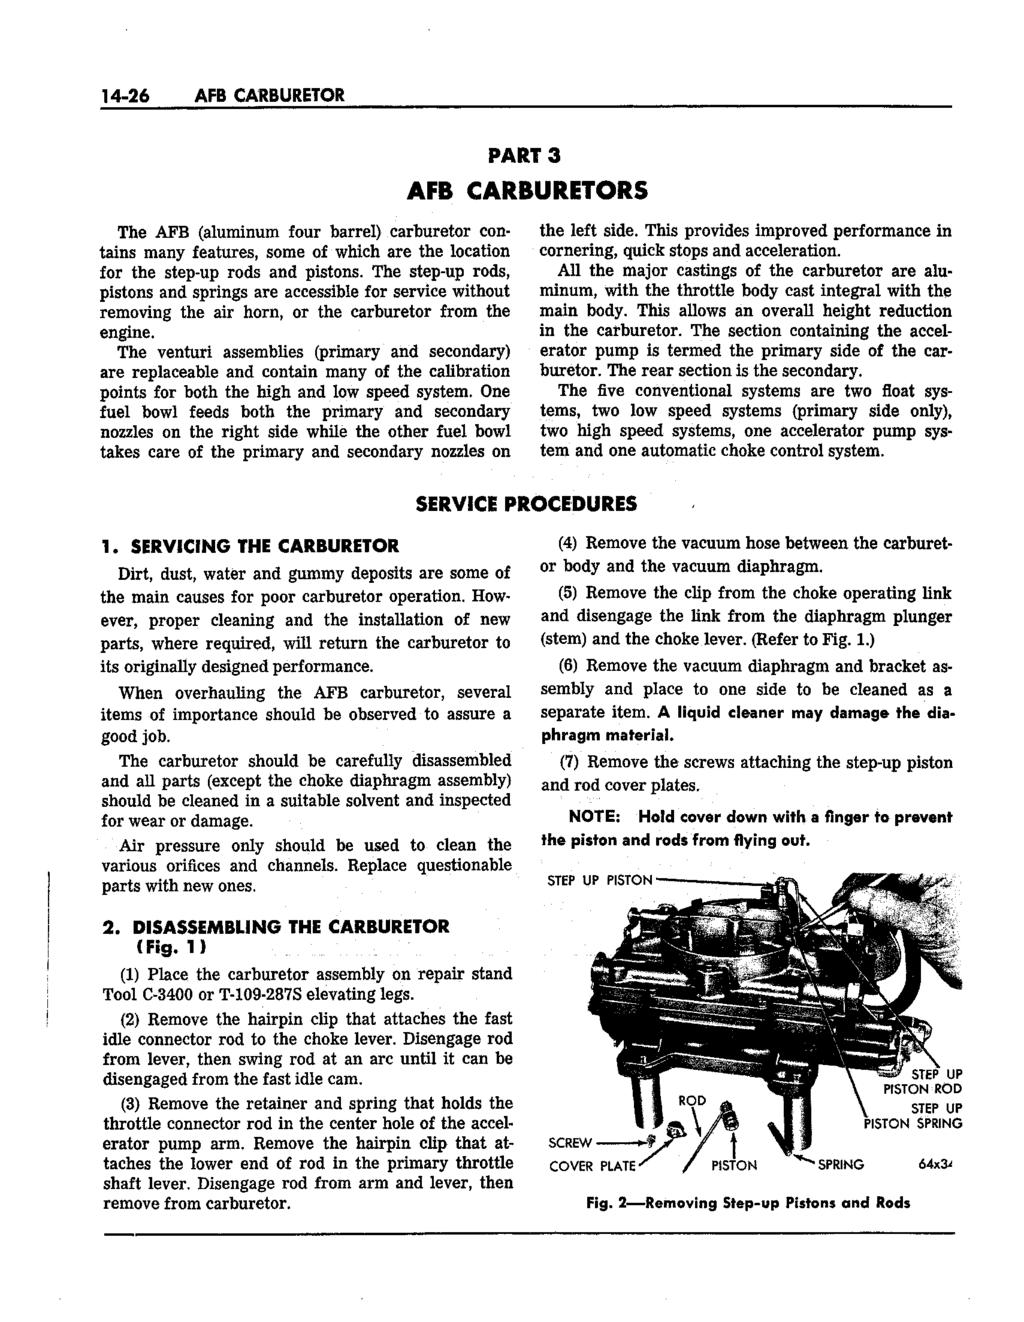 14-26 AFB CARBURETOR The AFB (aluminum four barrel) carburetor contains many features, some of which are the location for the step-up rods and pistons.